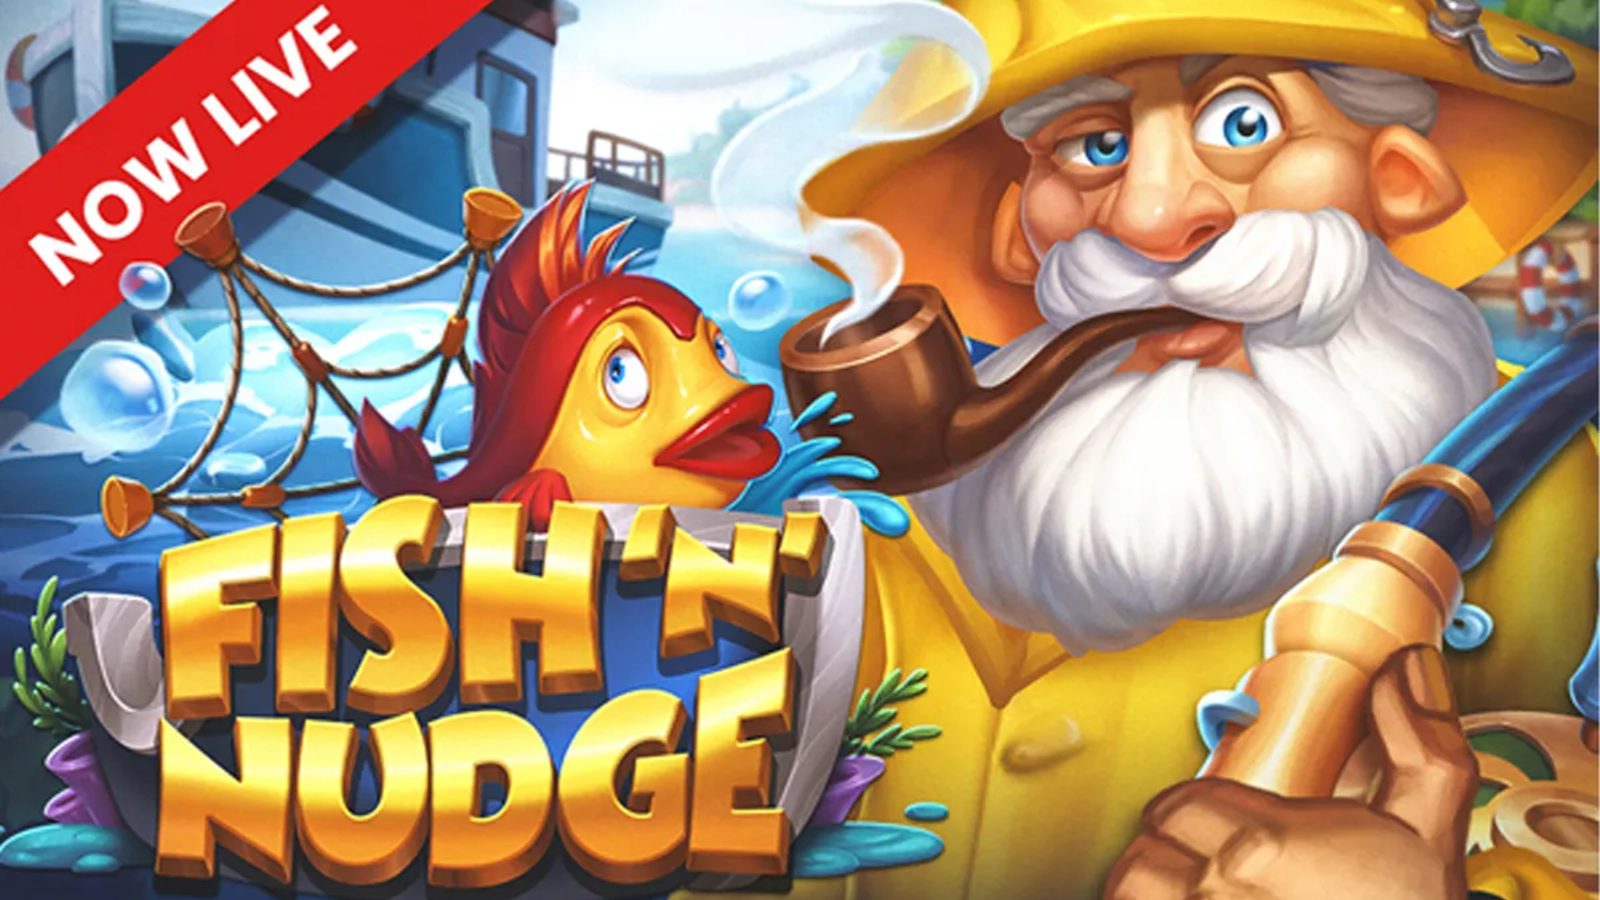 Push Gaming's Latest Release - Fish 'n' Nudge